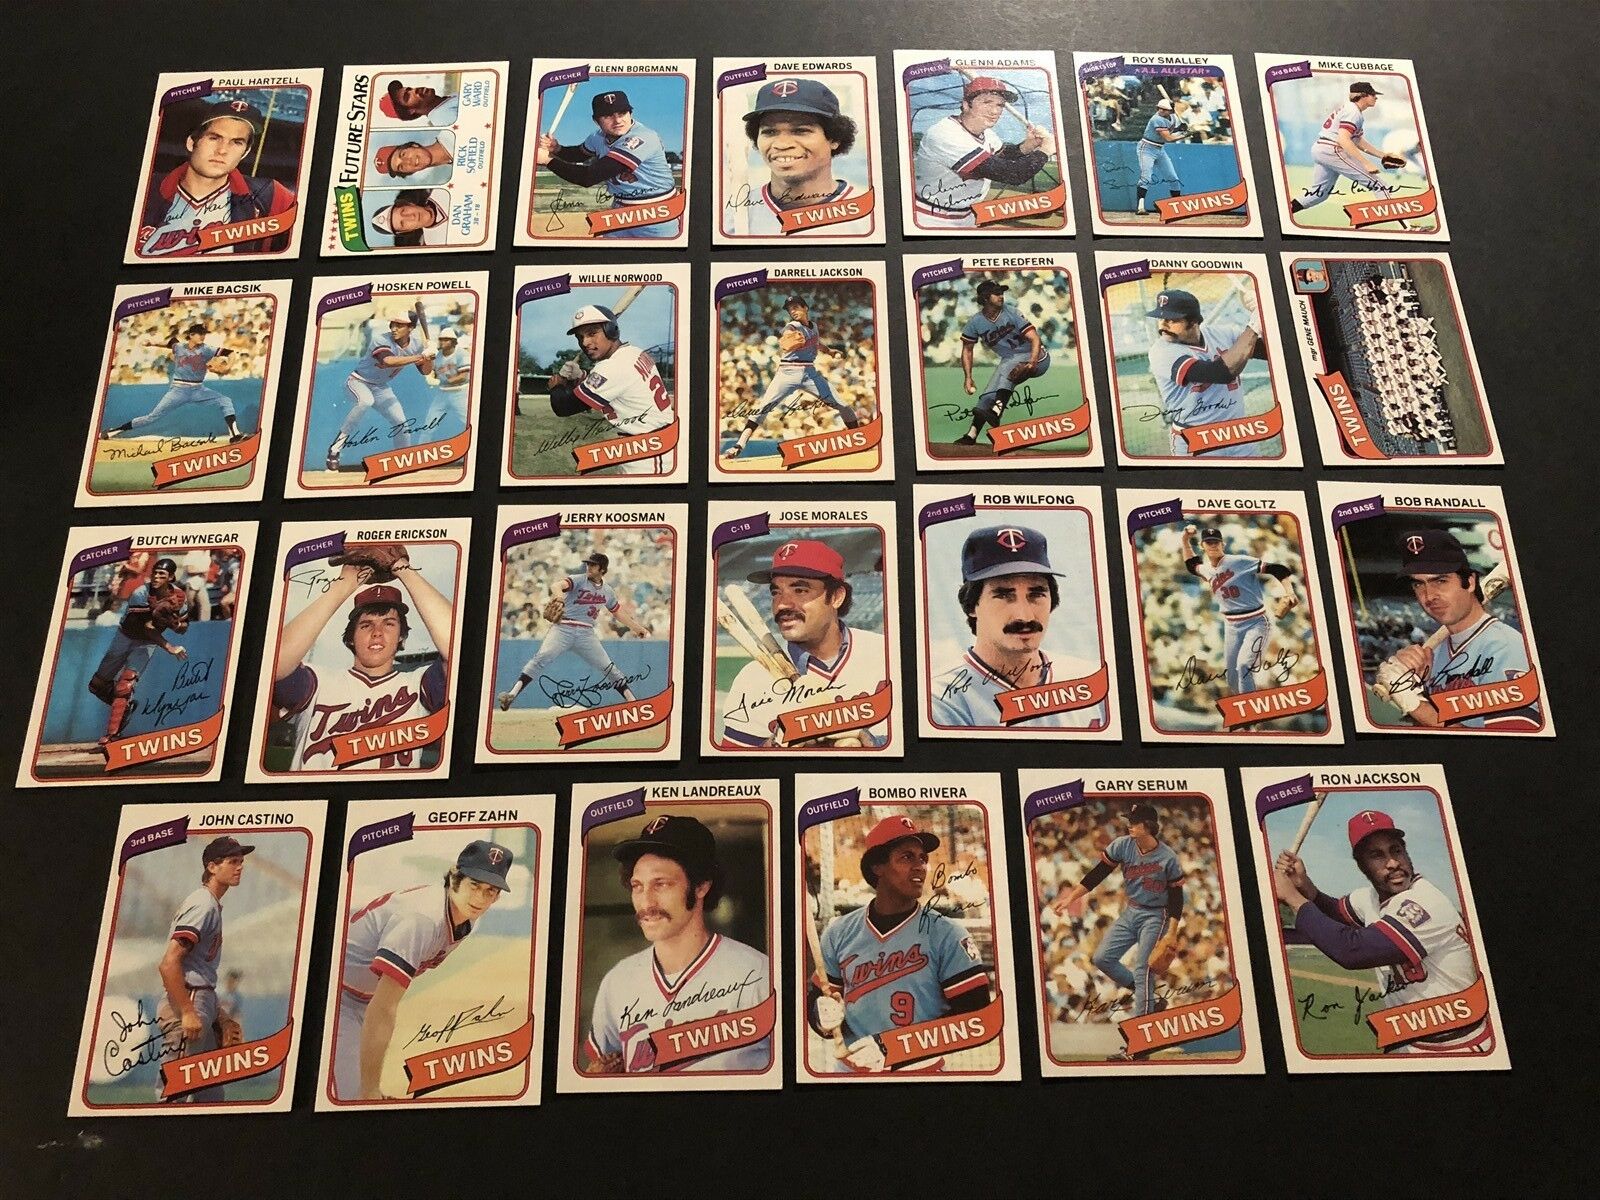  TWINS - 1980 Topps COMPLETE TEAM Set/Lot (27) Baseball cards value